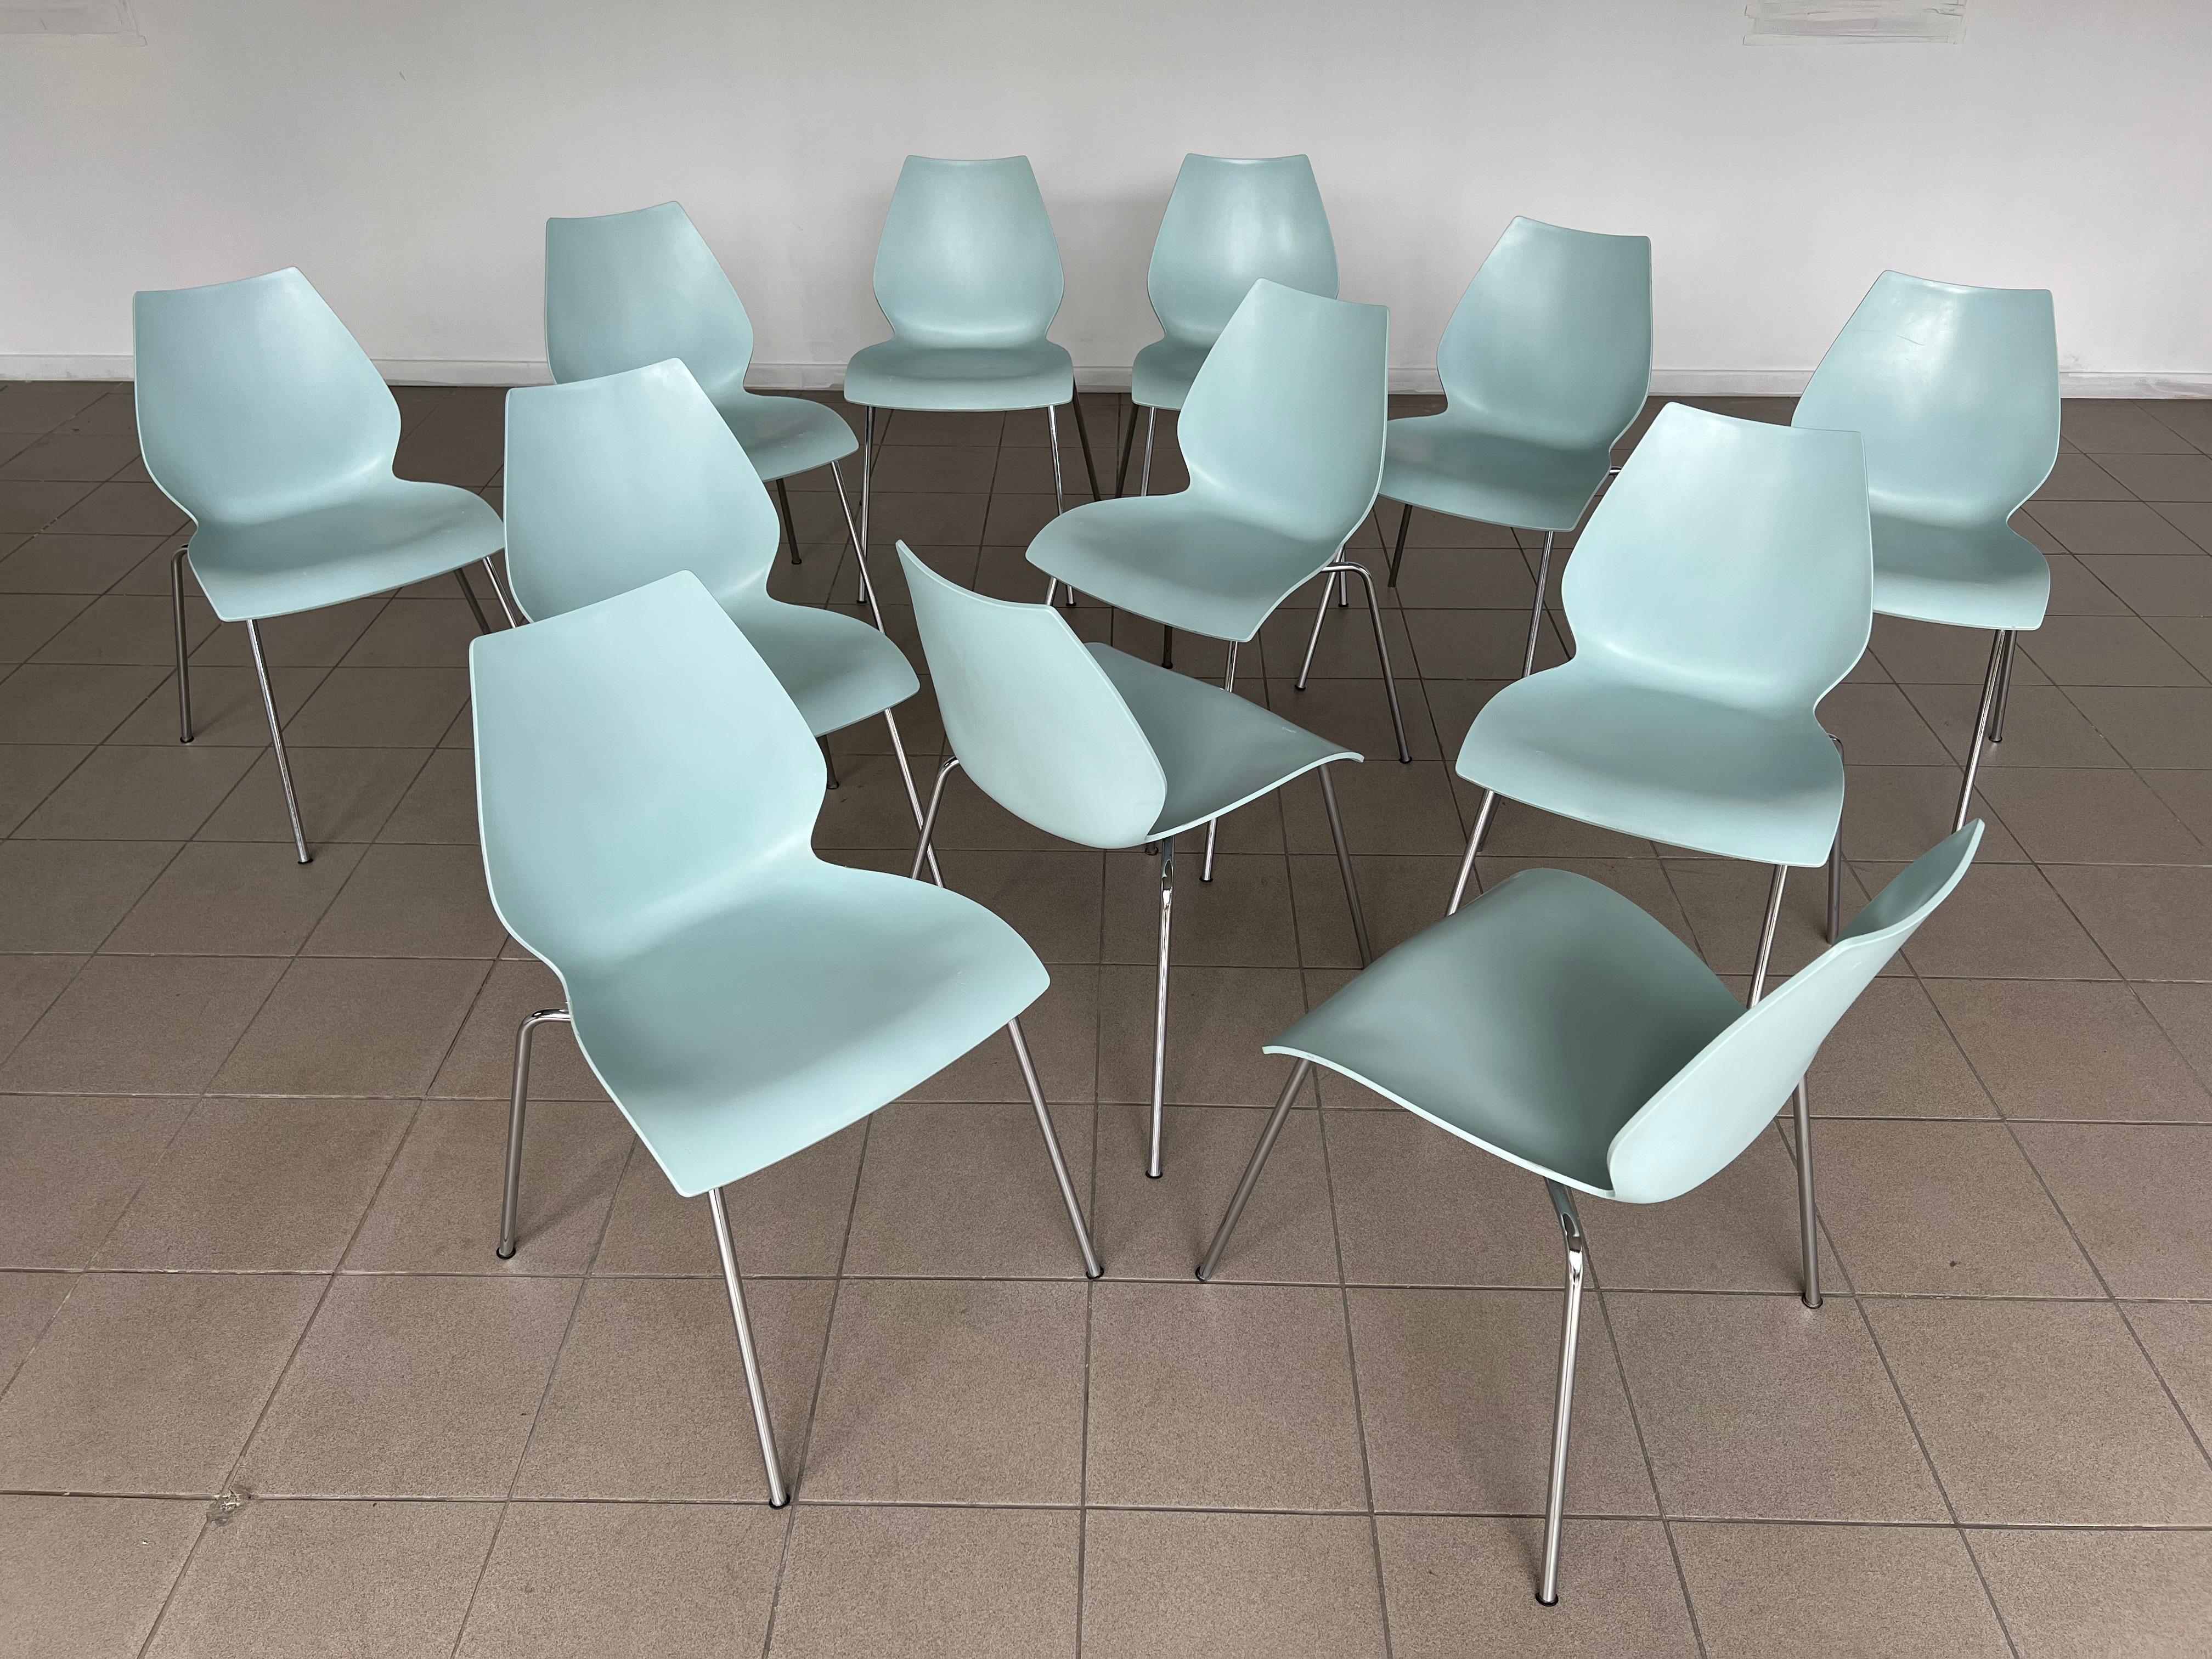 Steel Italian Maui Pale Blue Side Chairs Vico Magistretti for Kartell - Set of 12 For Sale